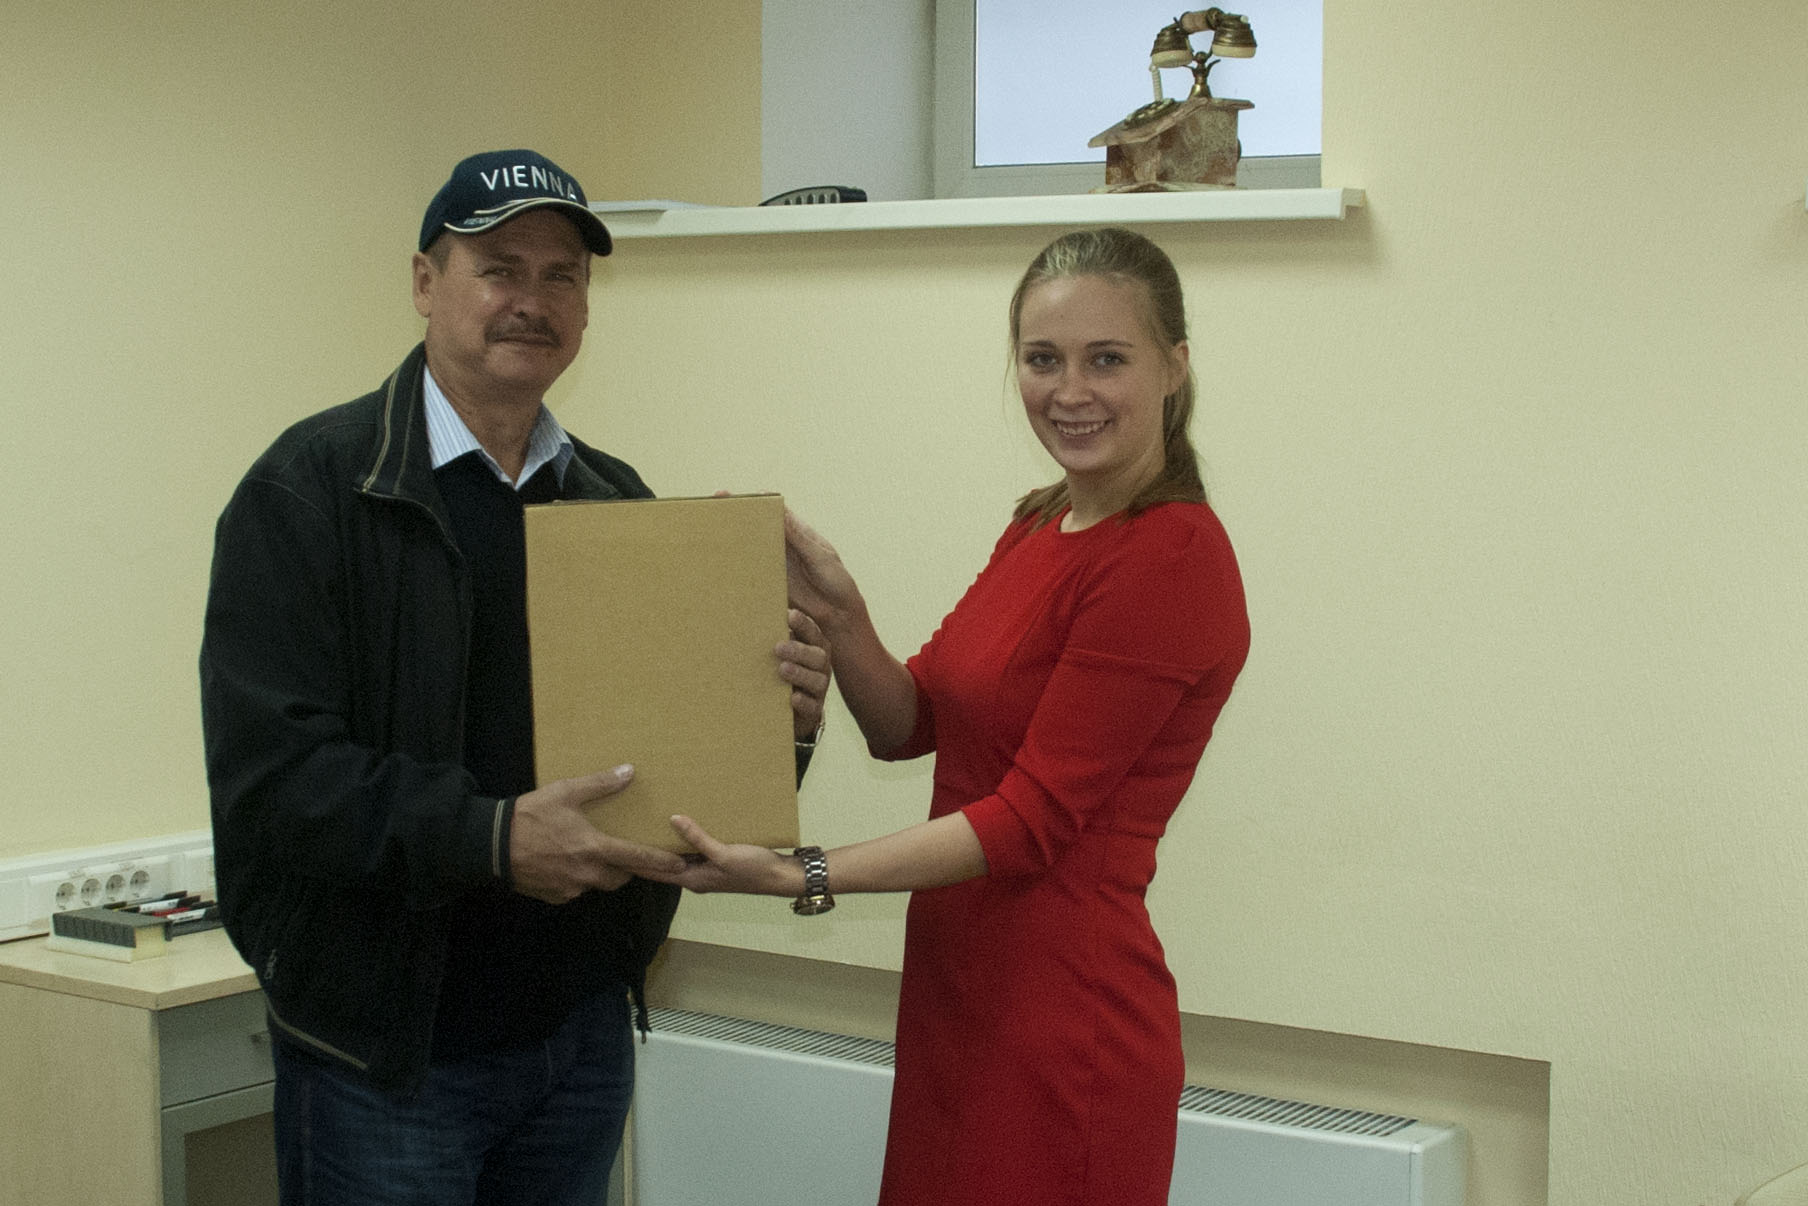 The ceremony took place at our office in Moscow, and the winner shared the details about installing the groundign with us